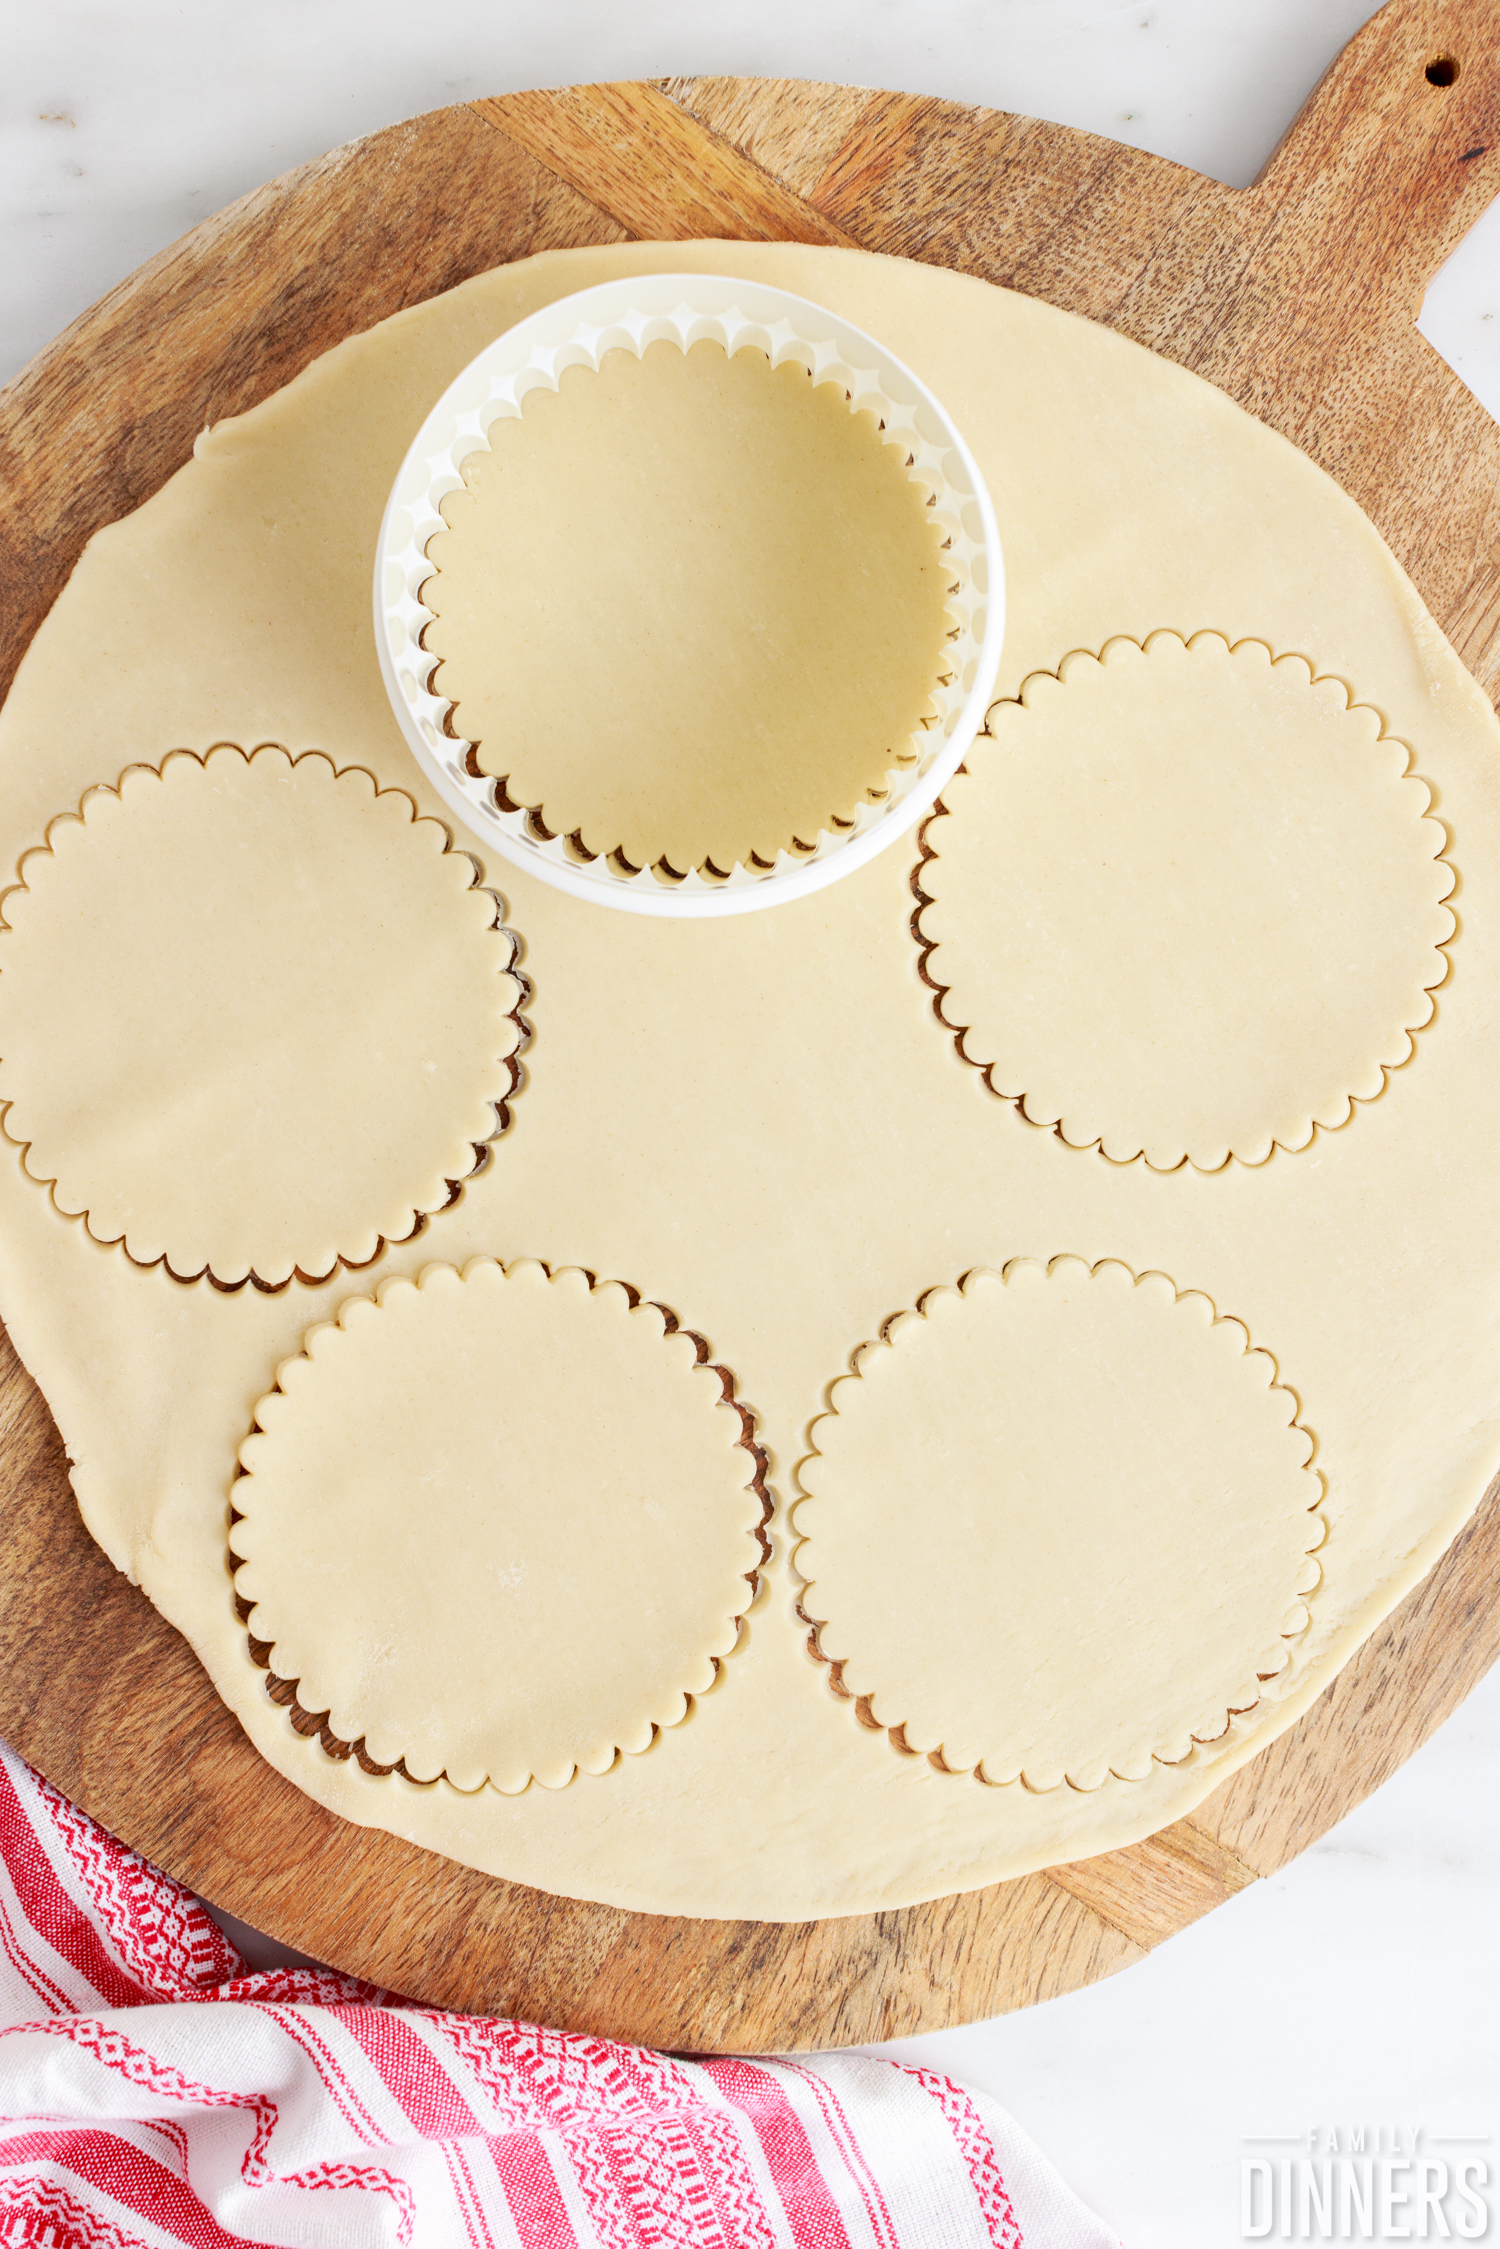 cut out rounds of pie crust